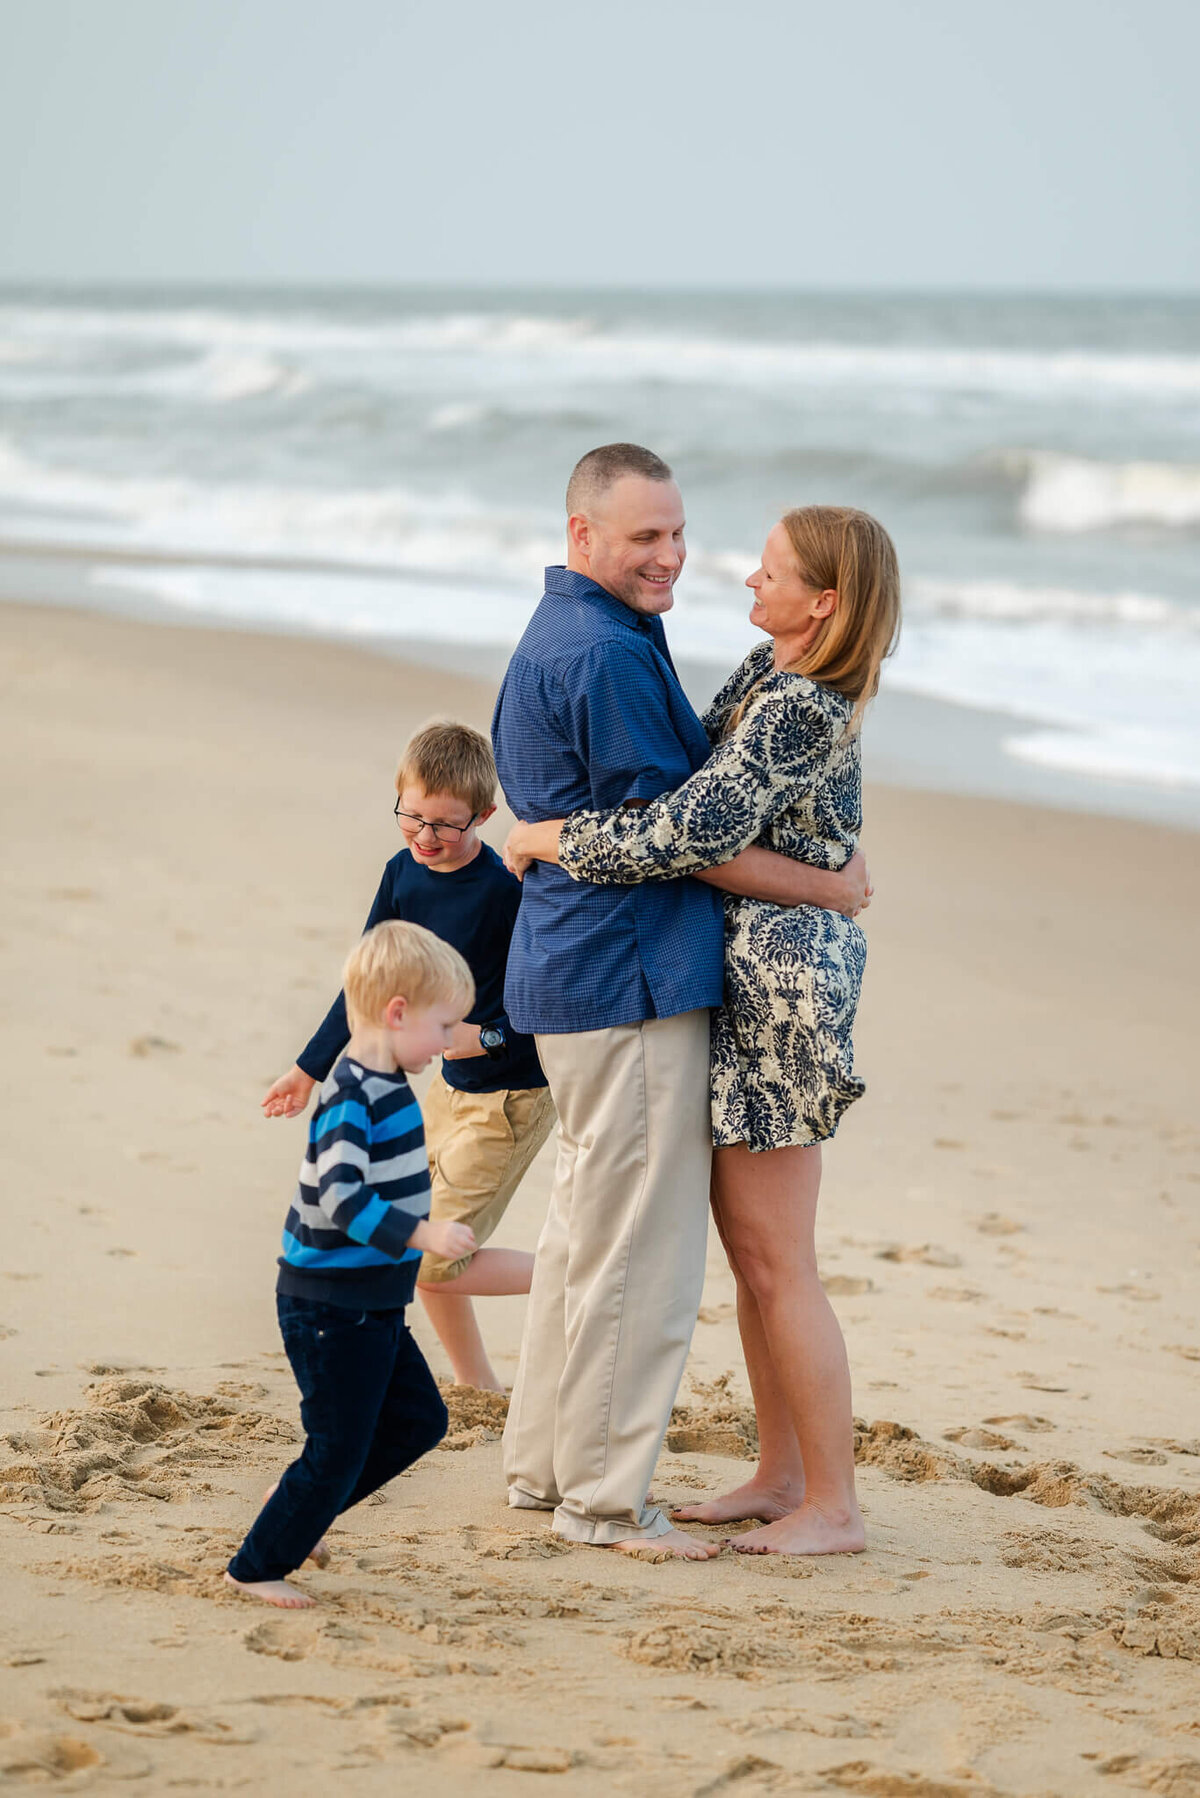 Mom and Dad hug each other in front of the waves on the beach while their two young sons run circles around them.